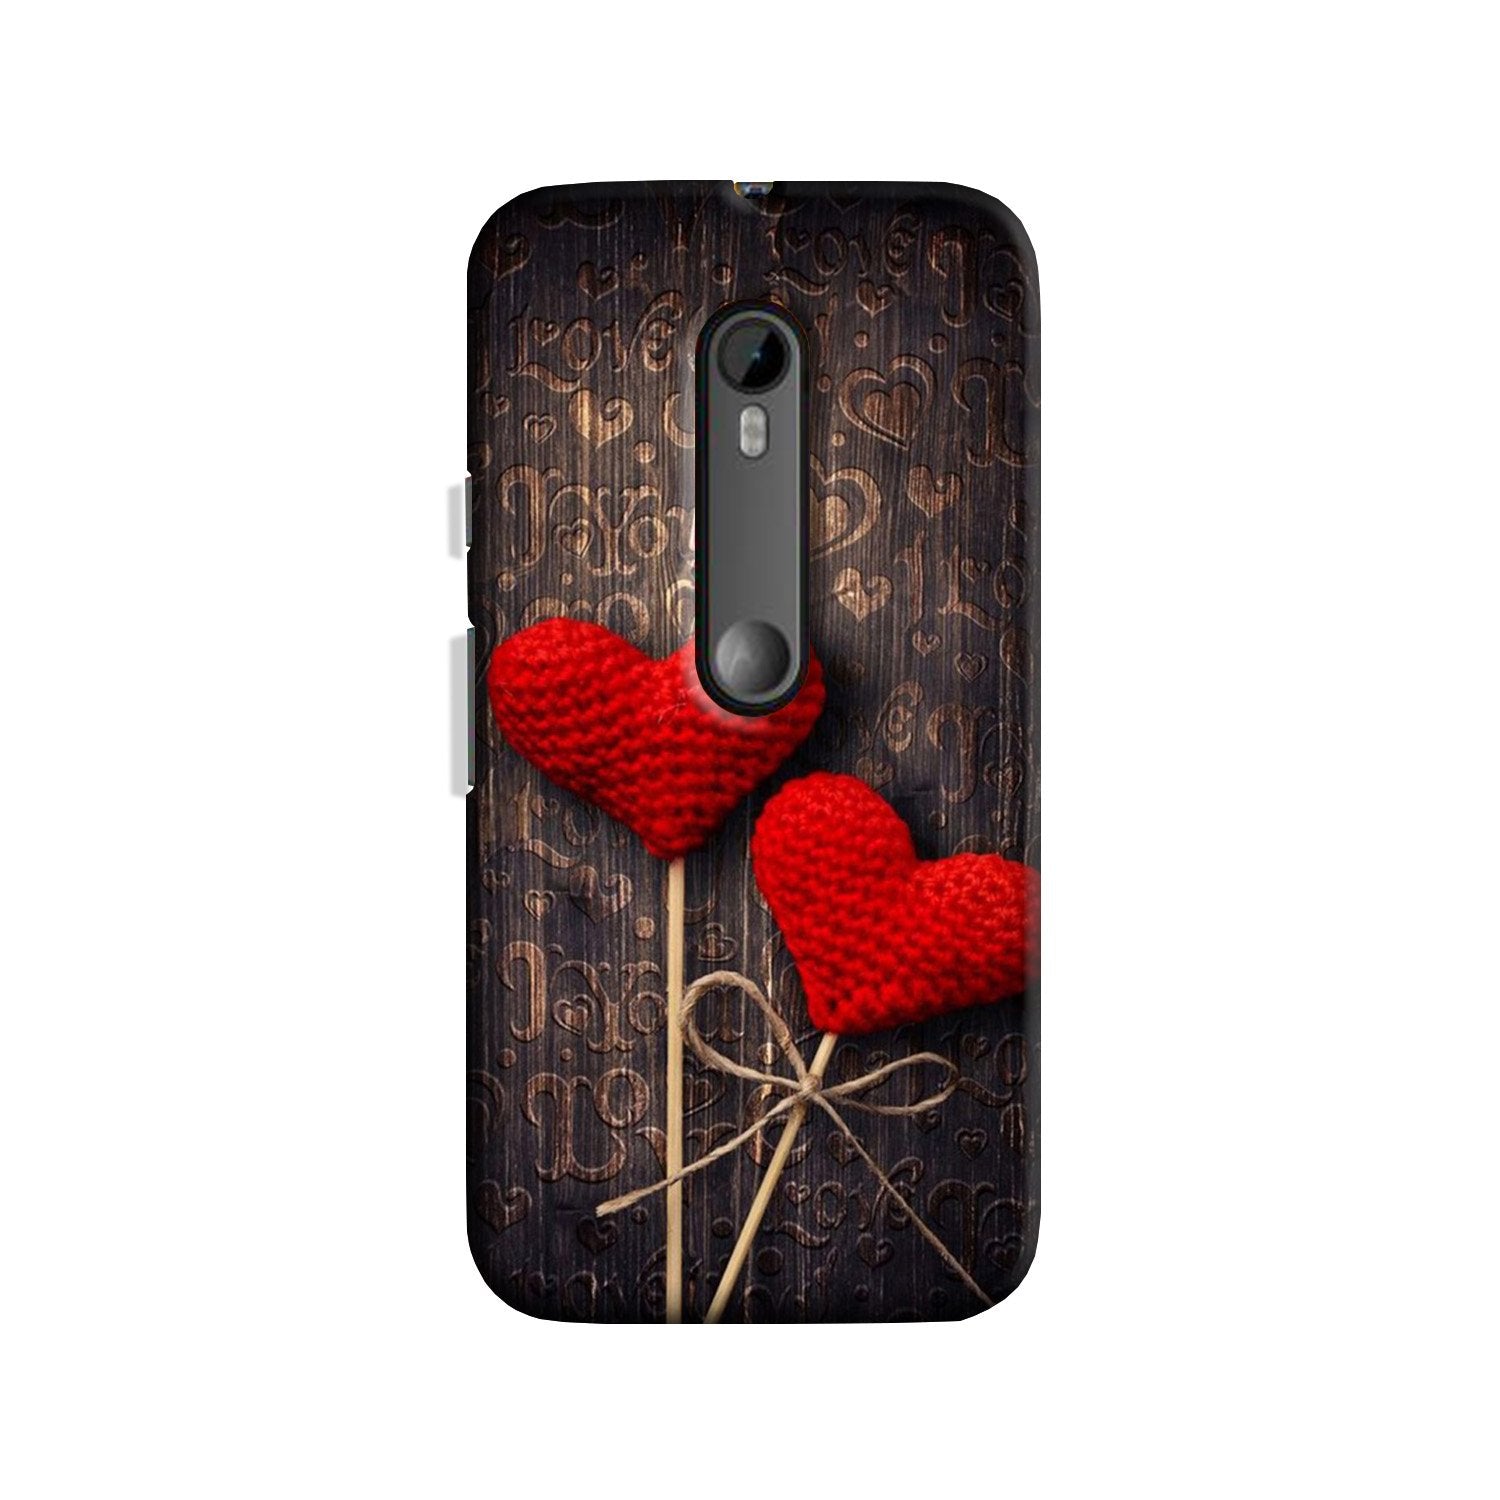 Red Hearts Case for Moto G 3rd Gen